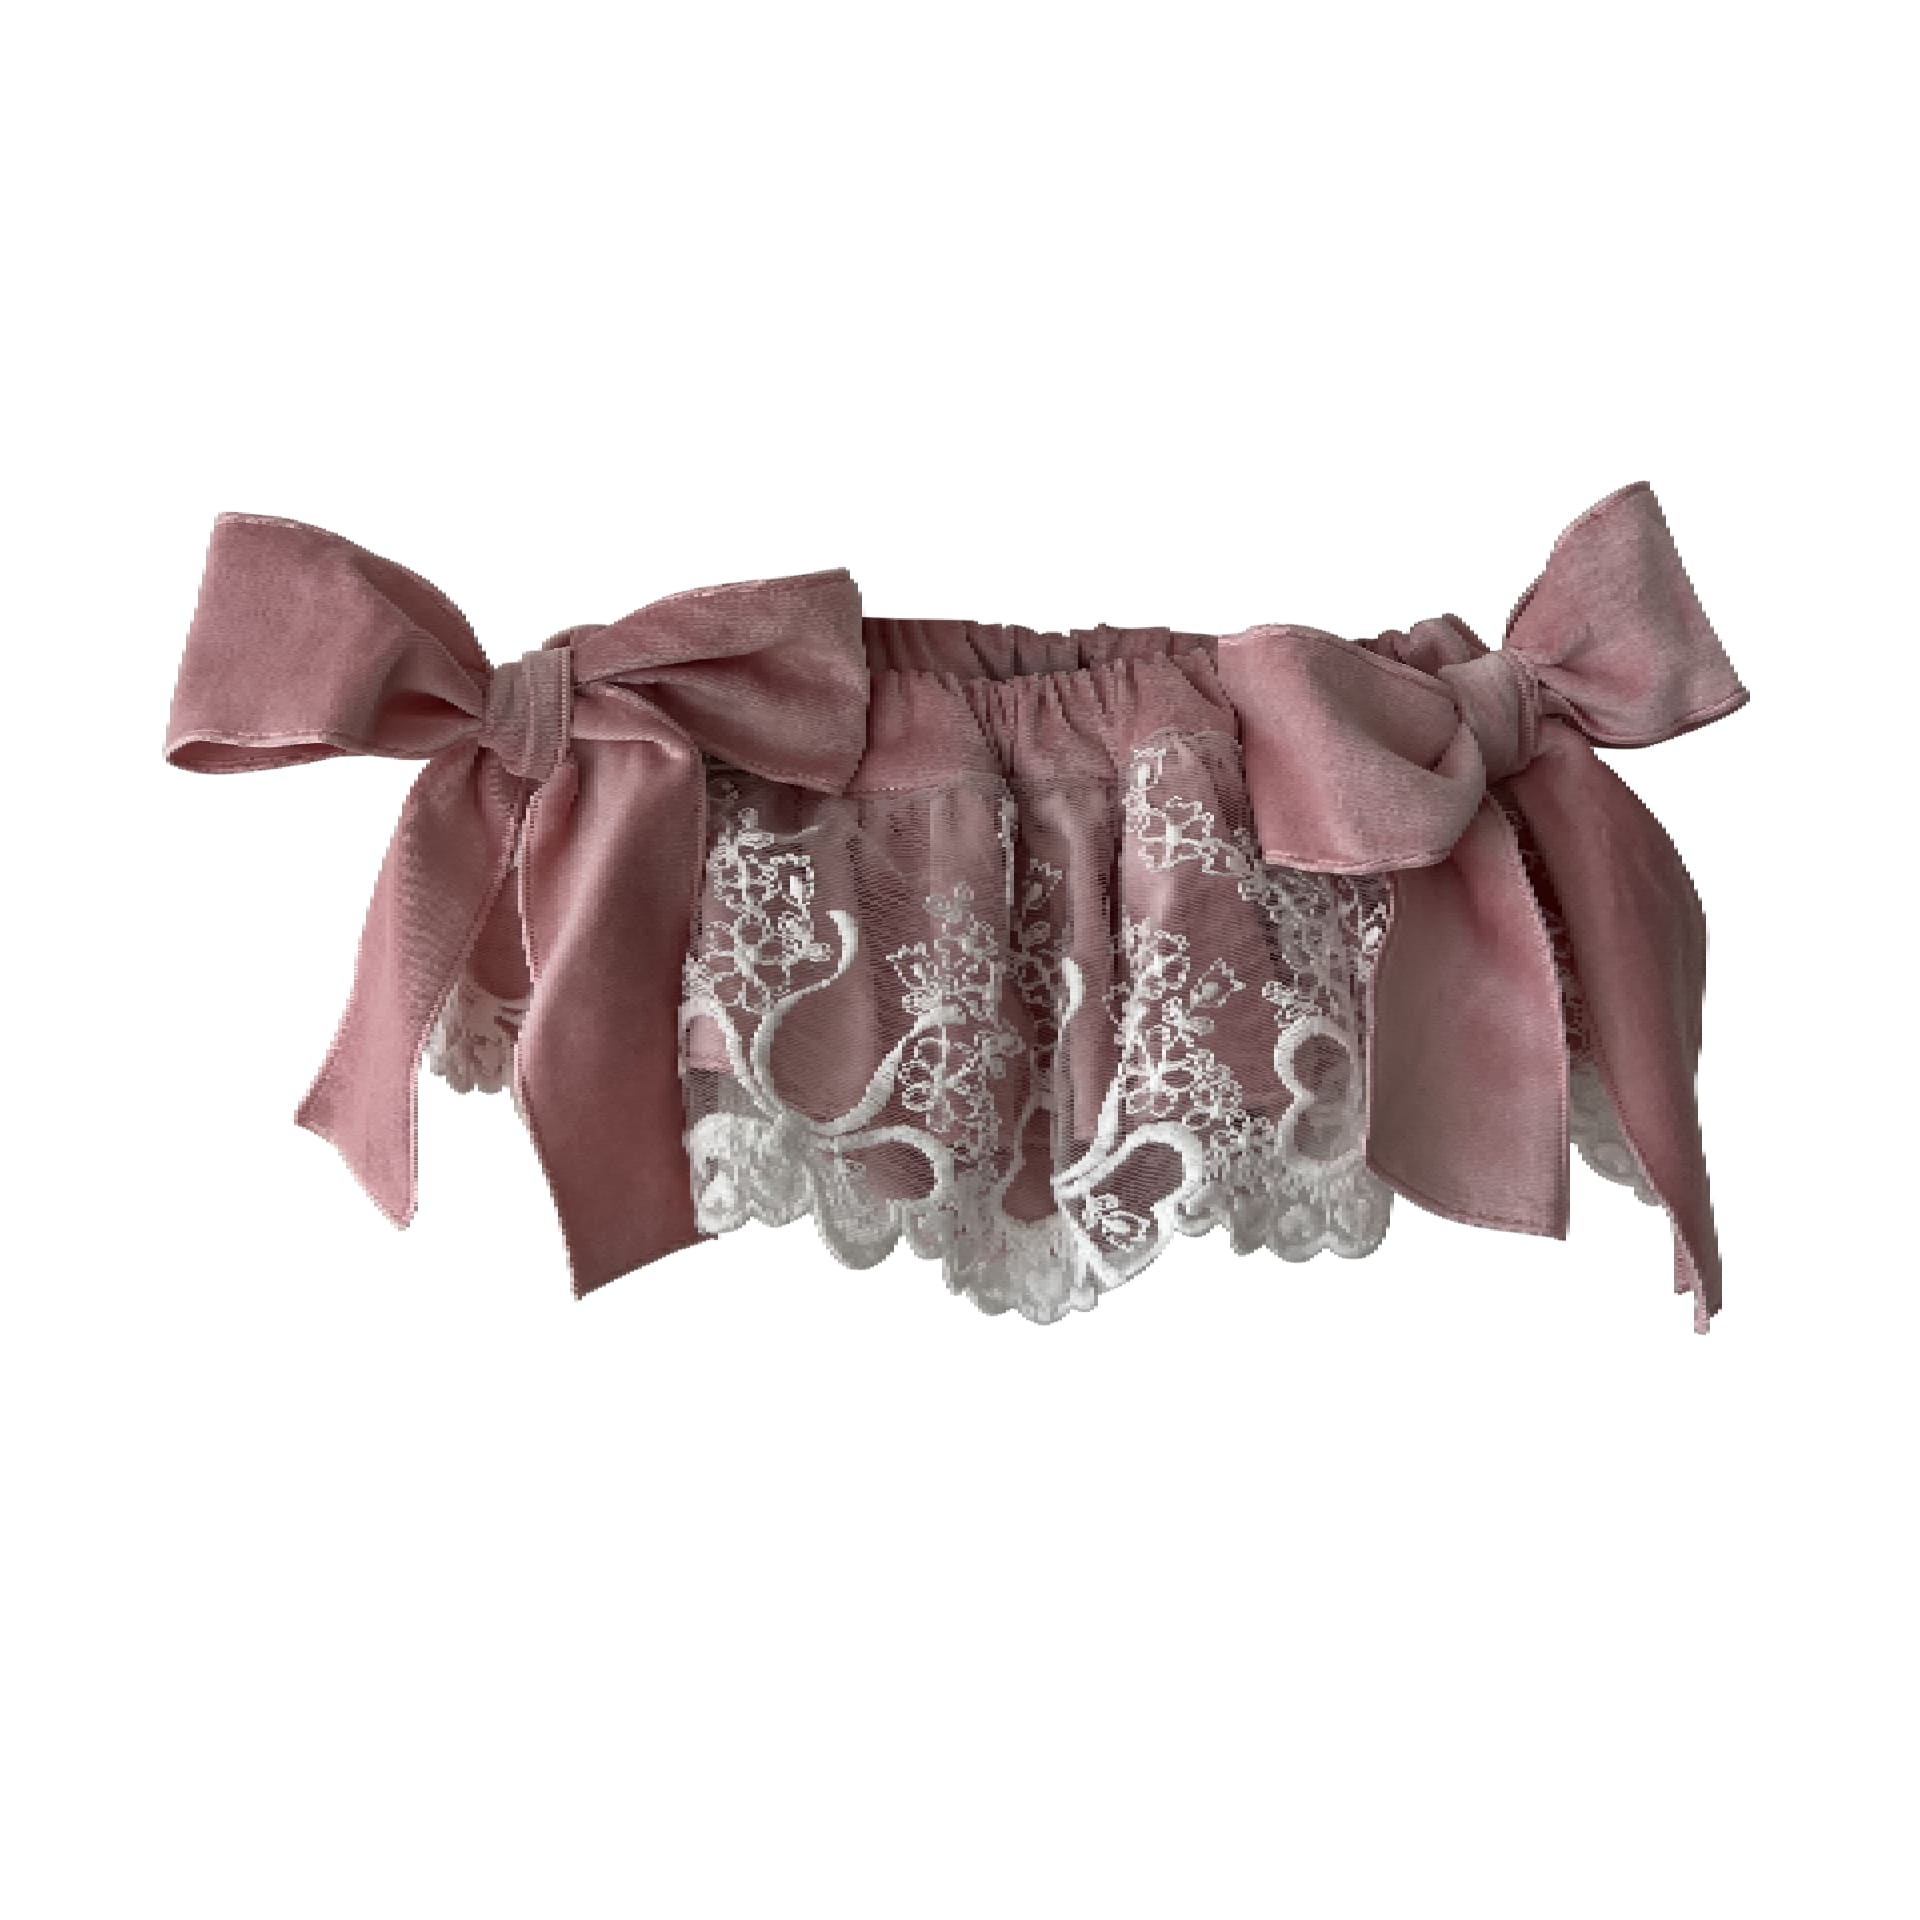 Pink velvet bloomer with lace